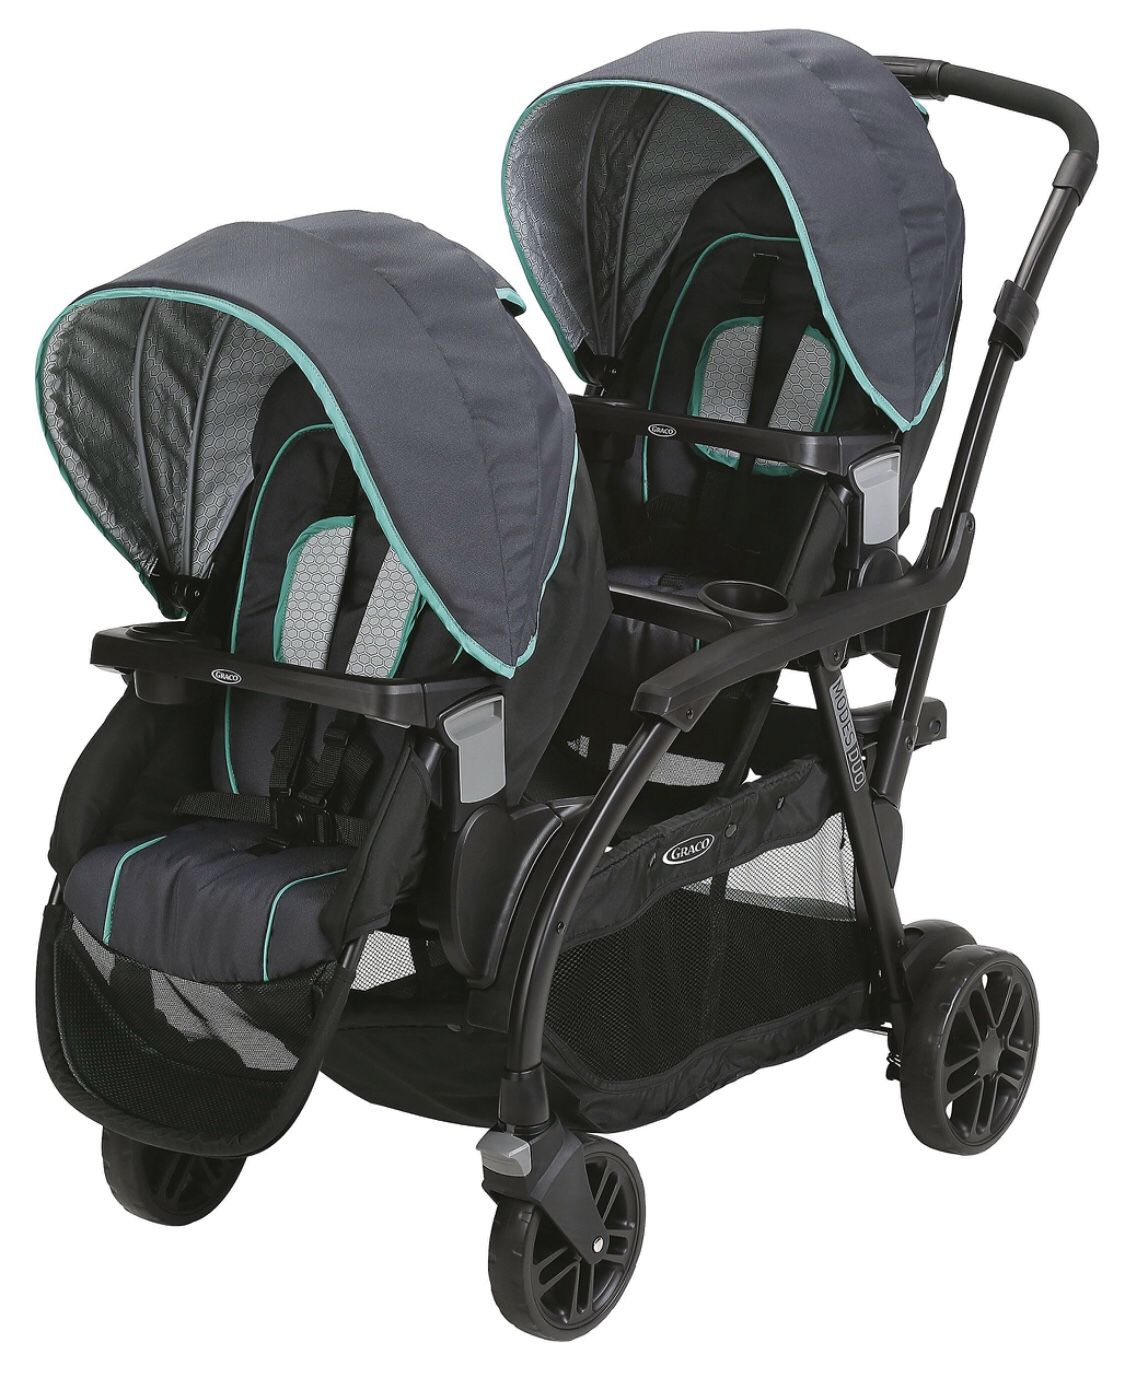 Graco modes duo stroller (double click connect stroller) like new